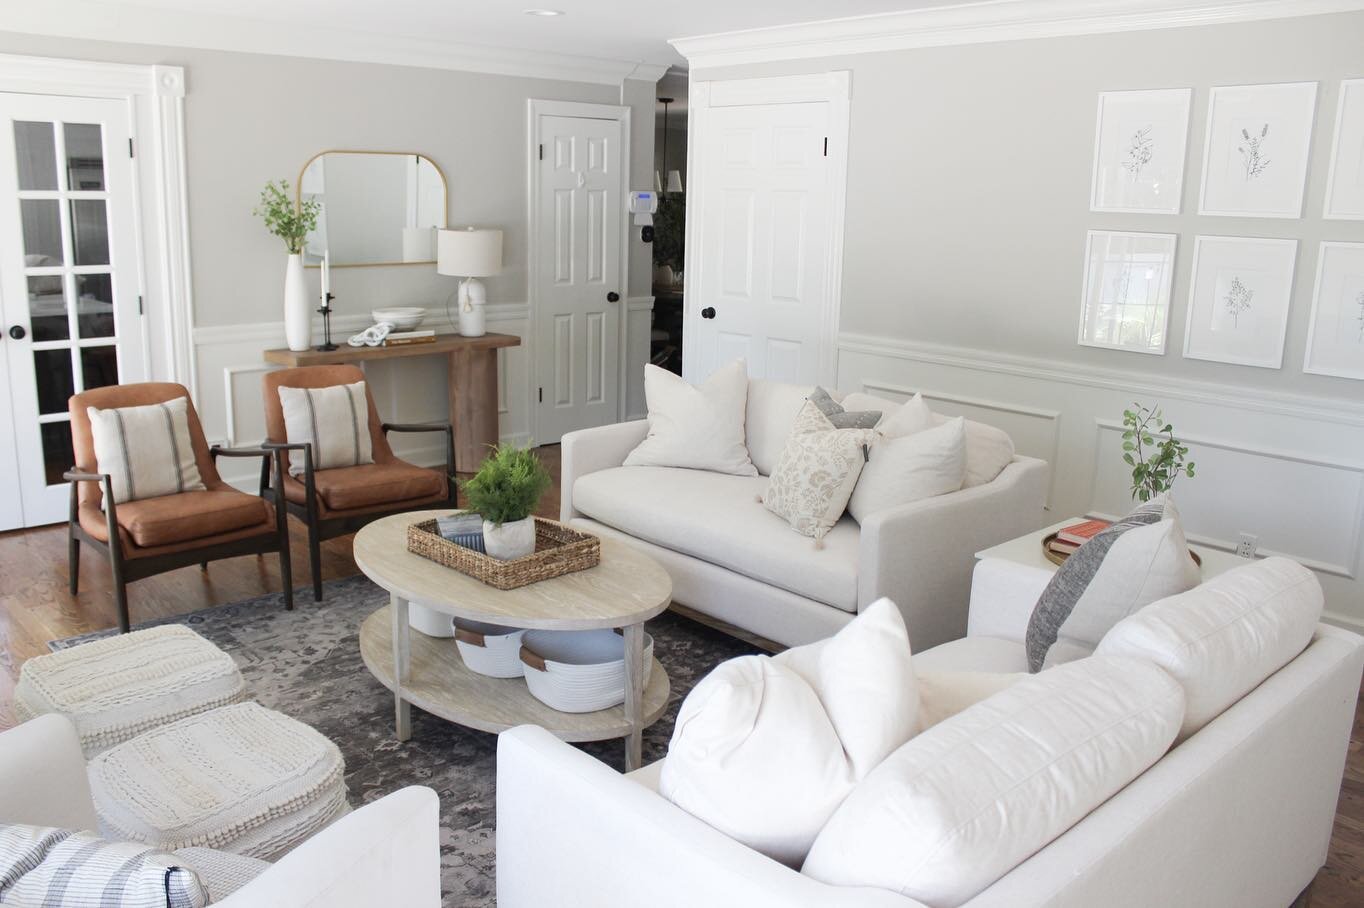 &bull;BEFORE&bull;AND&bull;AFTER&bull;

Swipe 👉🏻 to see how we transformed this room from a bold style to something more transitional, classic, and cozy. Although it didn&rsquo;t look bad before, I think it feels much more fresh and inviting now! 
